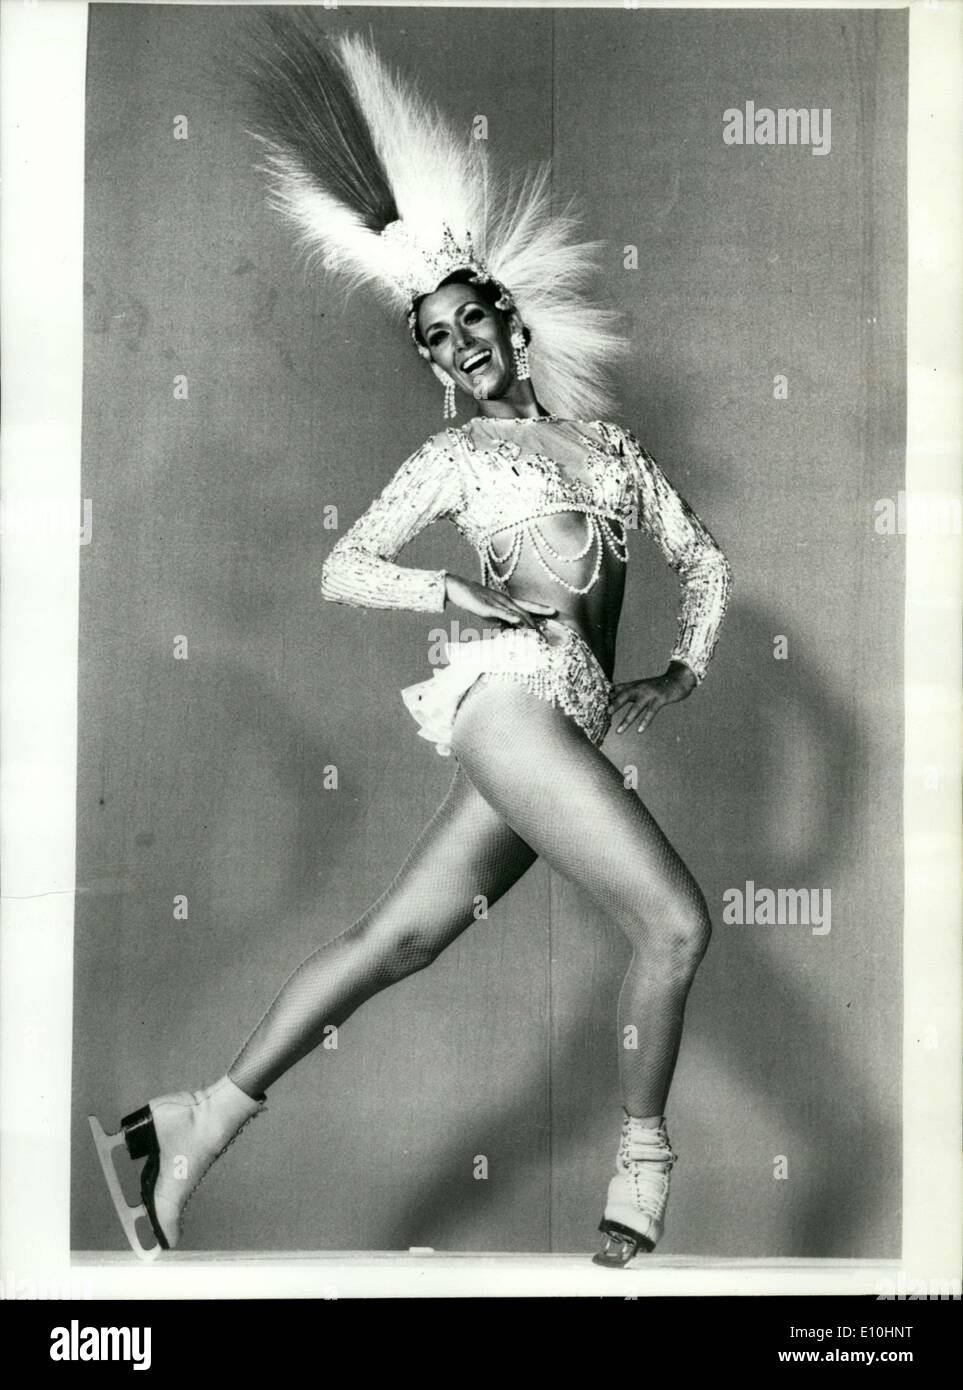 Feb. 13, 1973 - Joan Haanappel is a superstar of ''Holiday on Ice'' and exudes beauty and perfection on the ice rink. A four-time national champion from Holland, Joan is one famous member of the cast presenting the show this year in Paris. Stock Photo